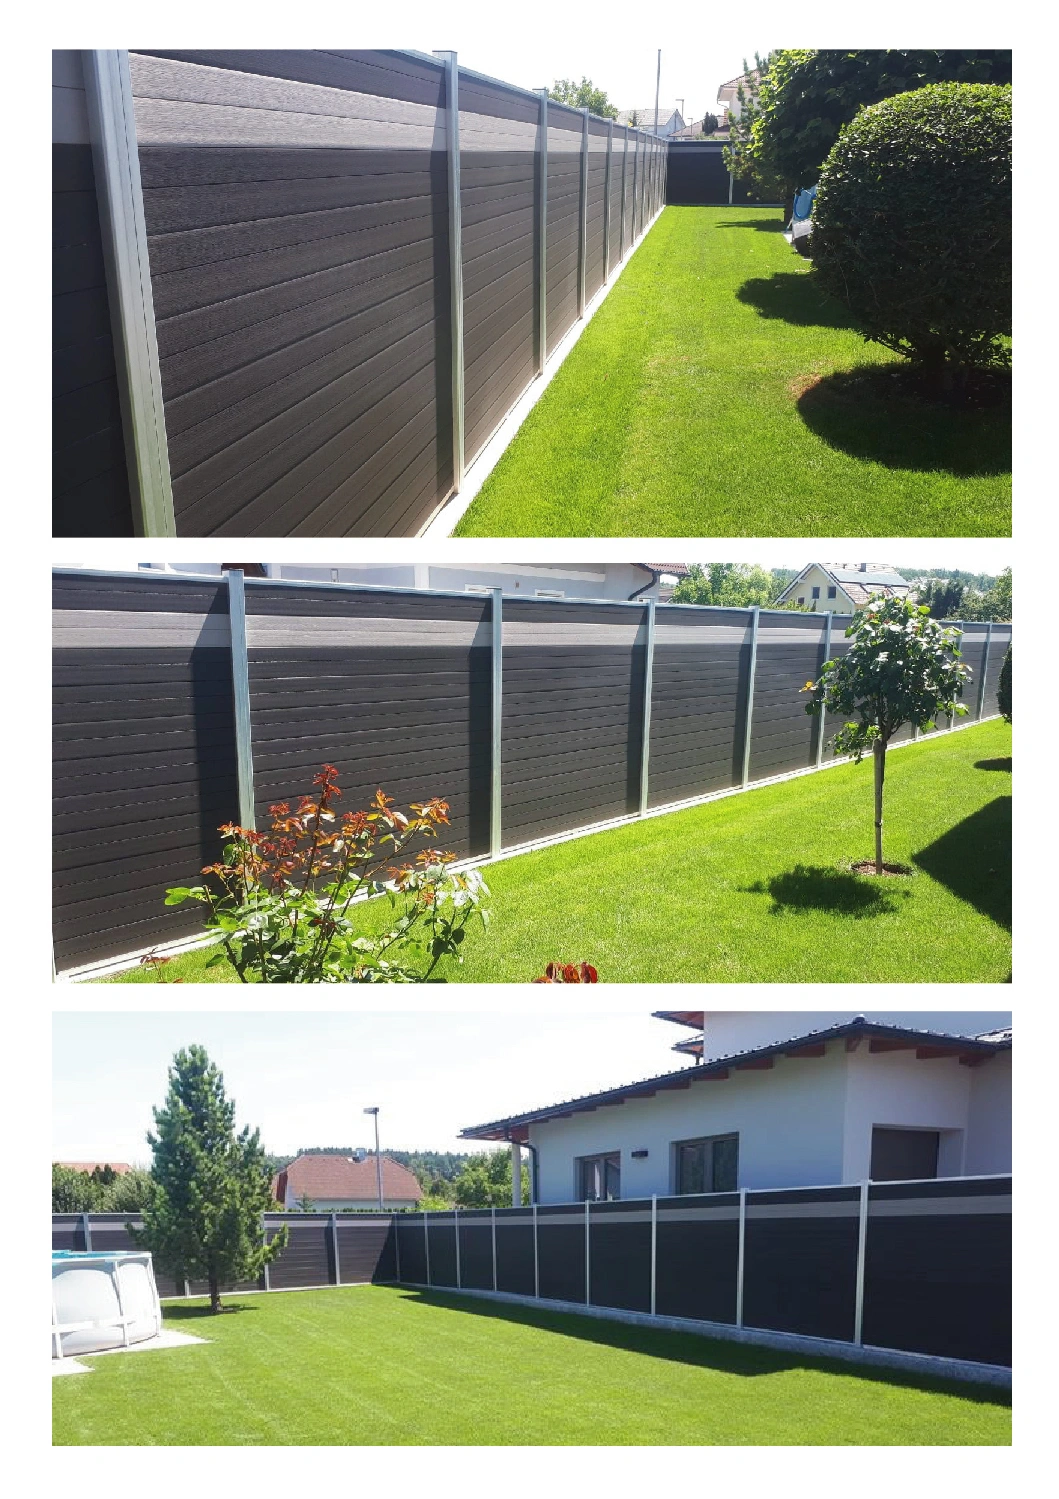 Low Upkeep Weather Resistant Waterproof Anti-Aging Hard-Wearing Plastic Wood Texture Composite Fence WPC